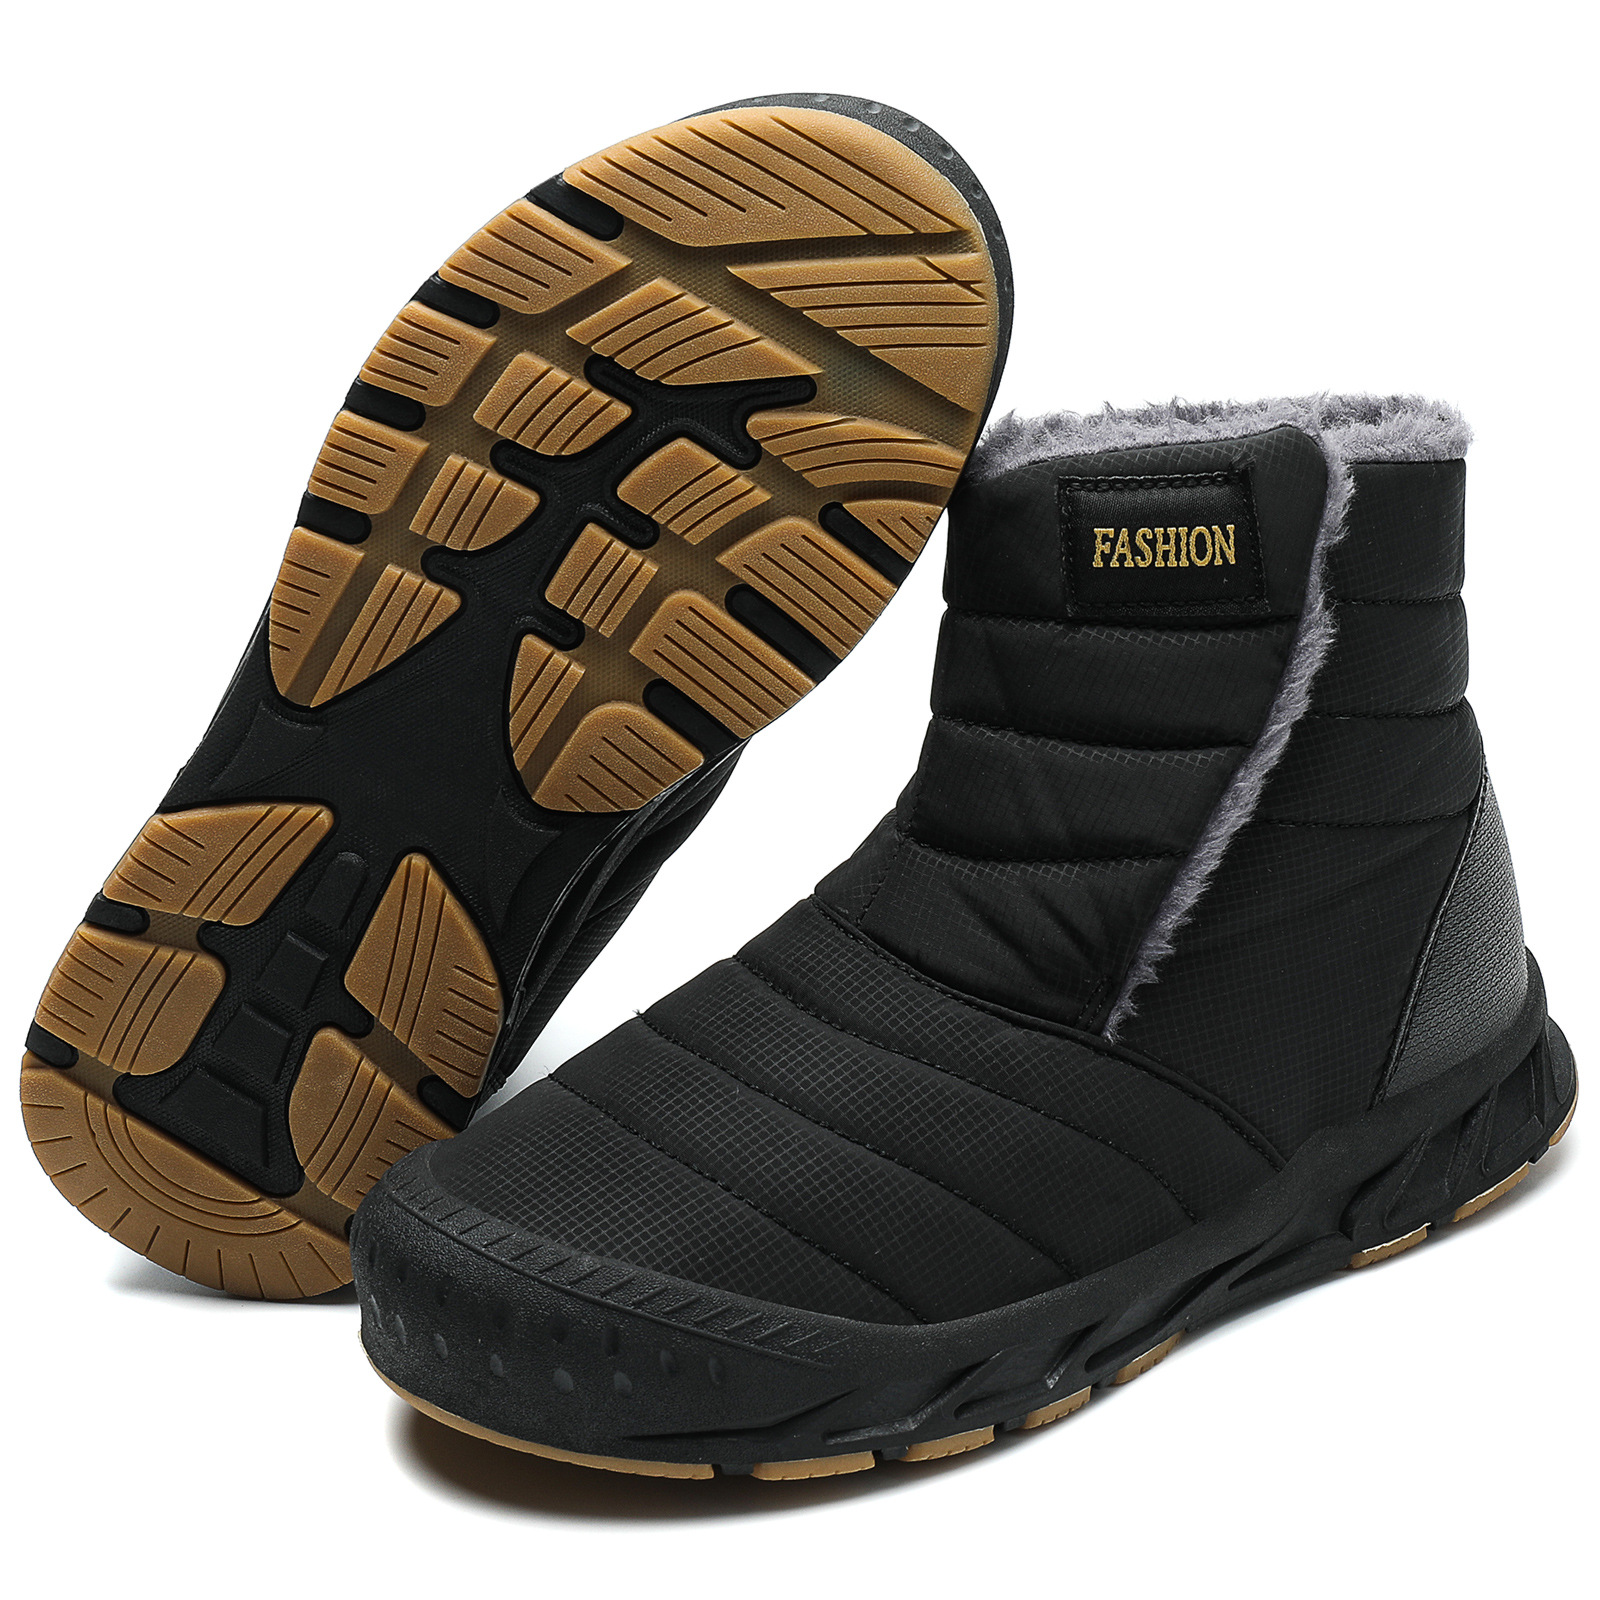 MEN'S HIGH-TOP THICKENED WARM AND COMFORTABLE SNOW BOOTS